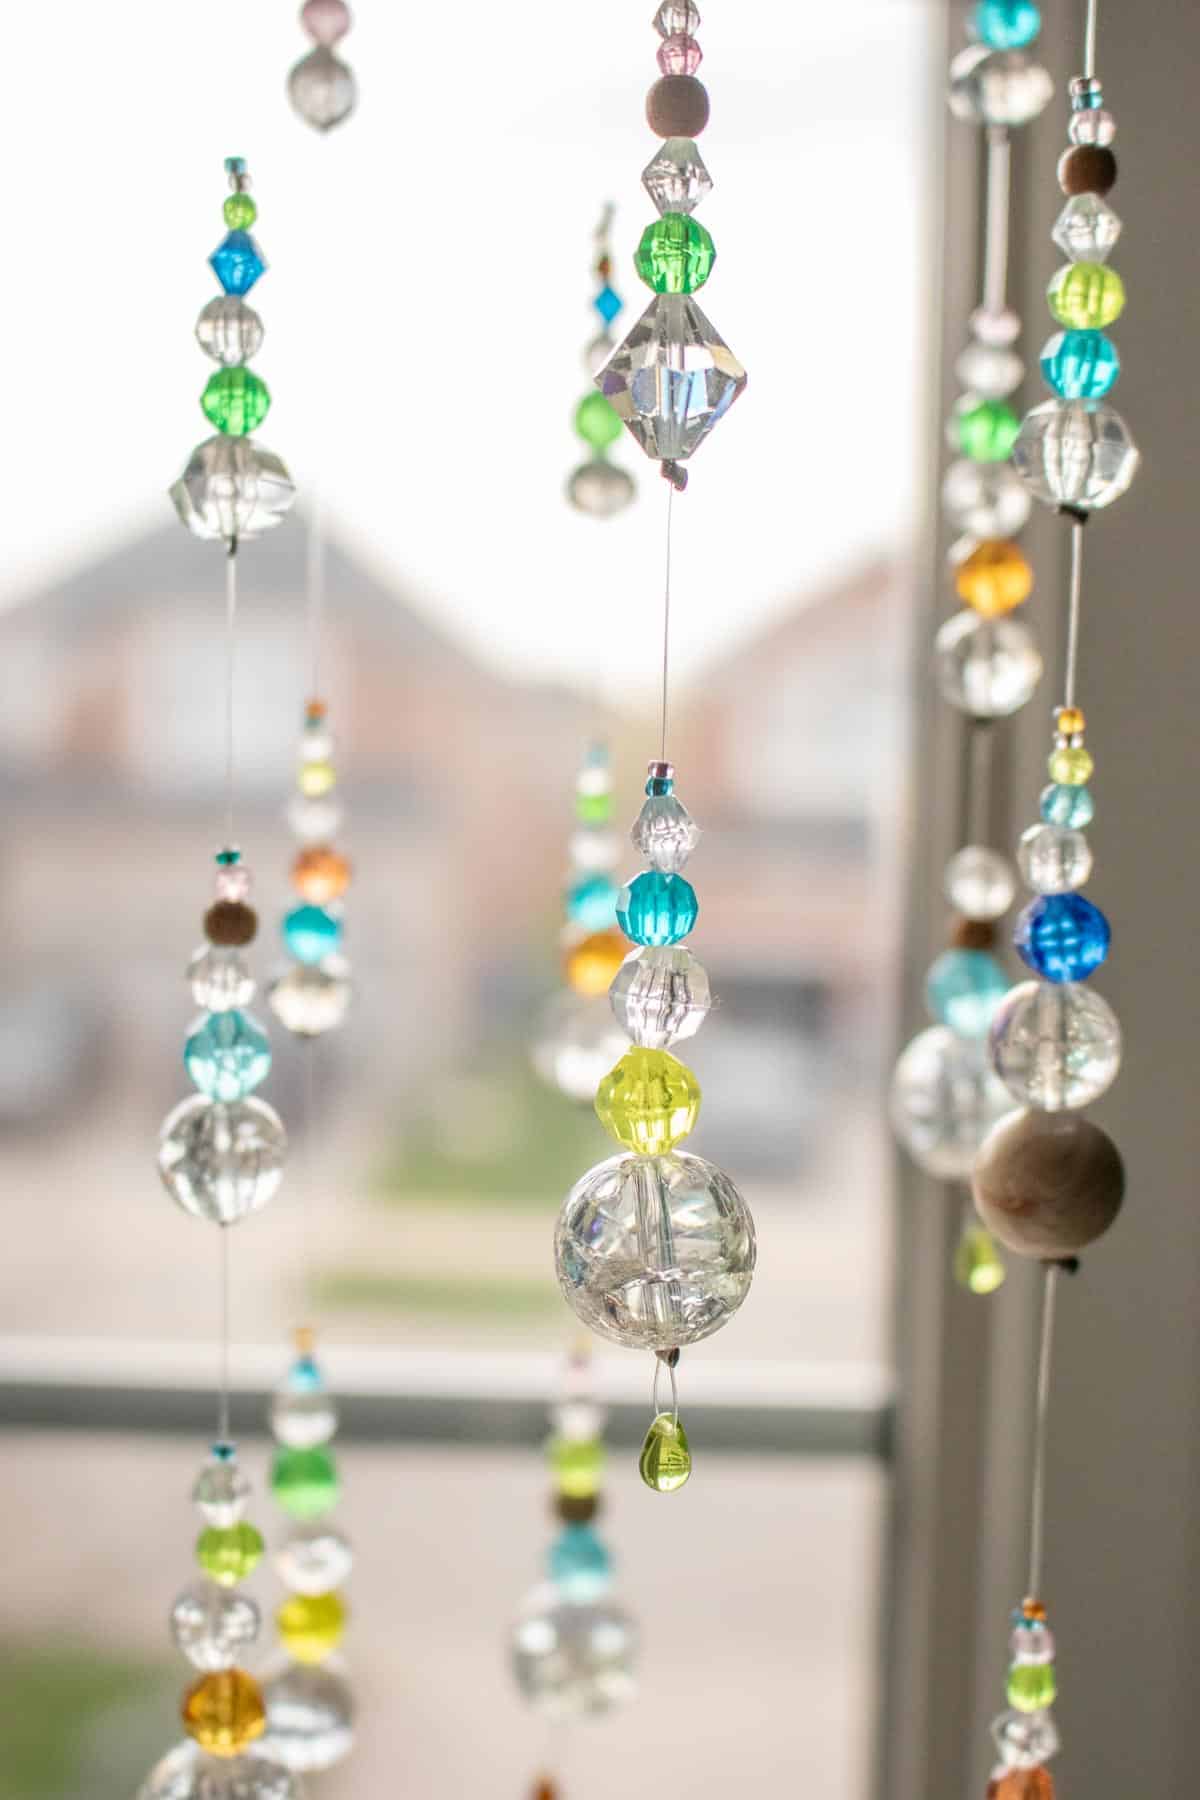 Buy Make it Real Crystal Sun Catcher at